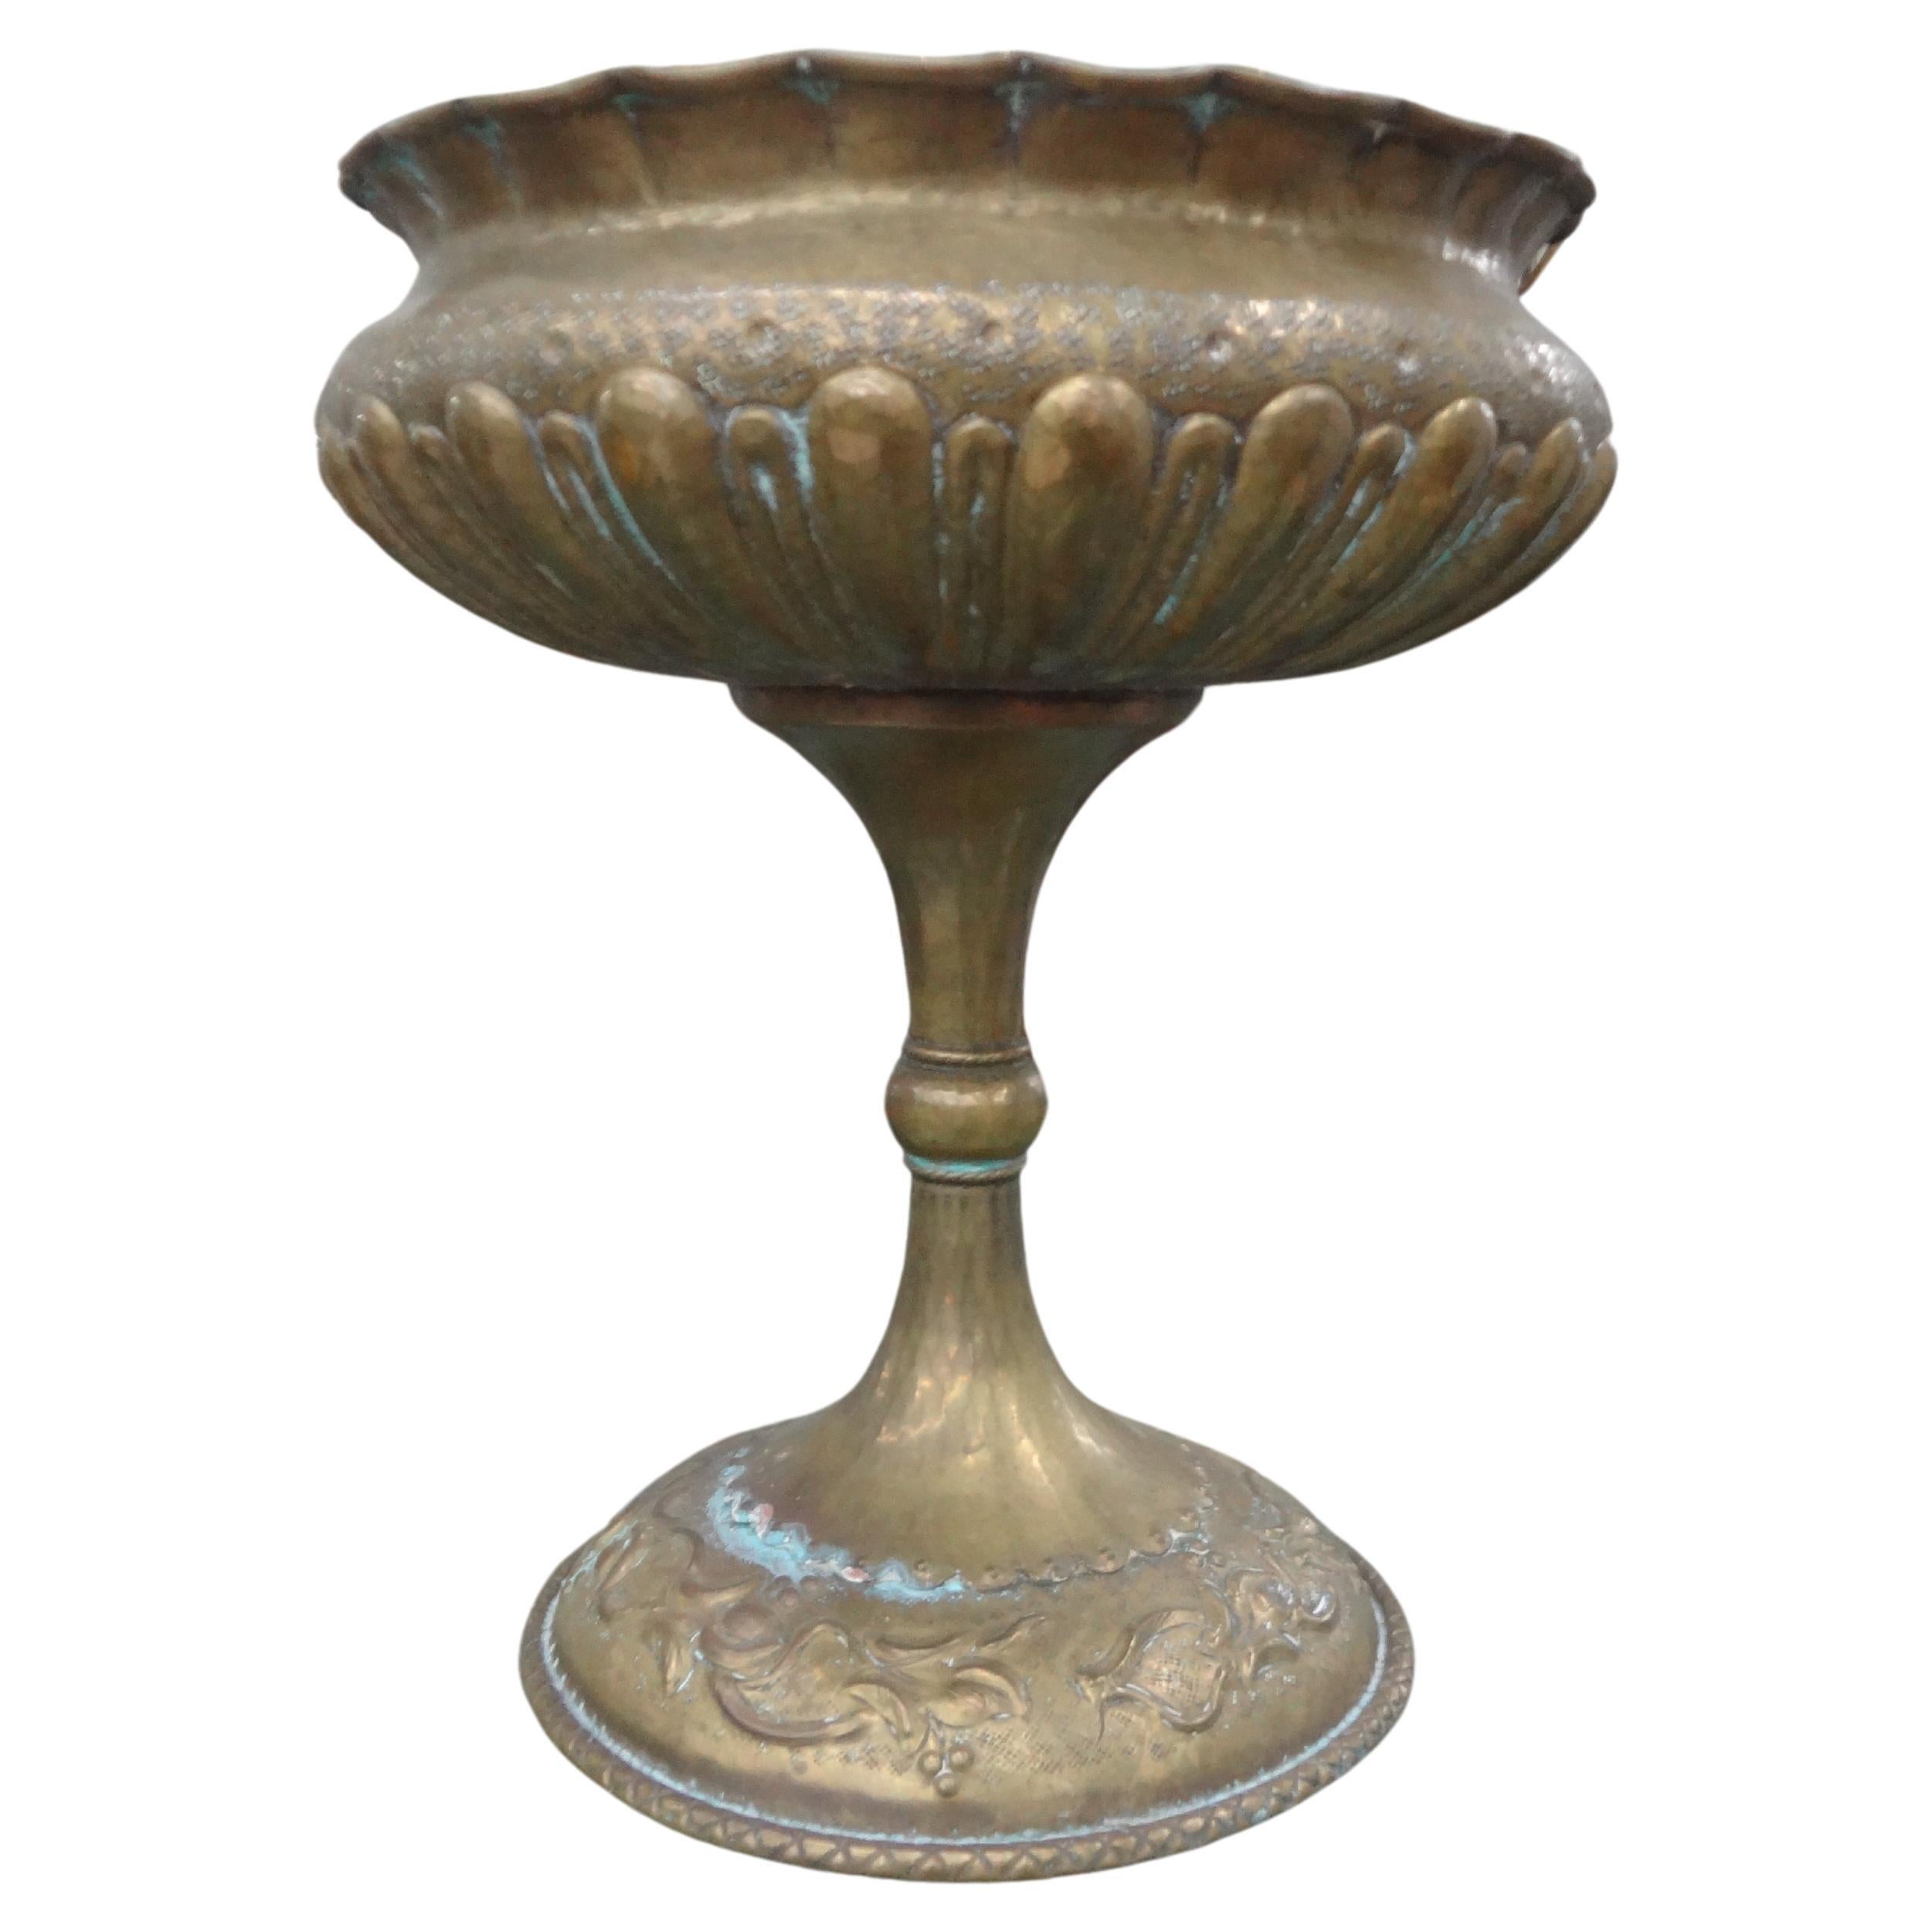 Italian Hammered Brass Urn Or Vessel For Sale